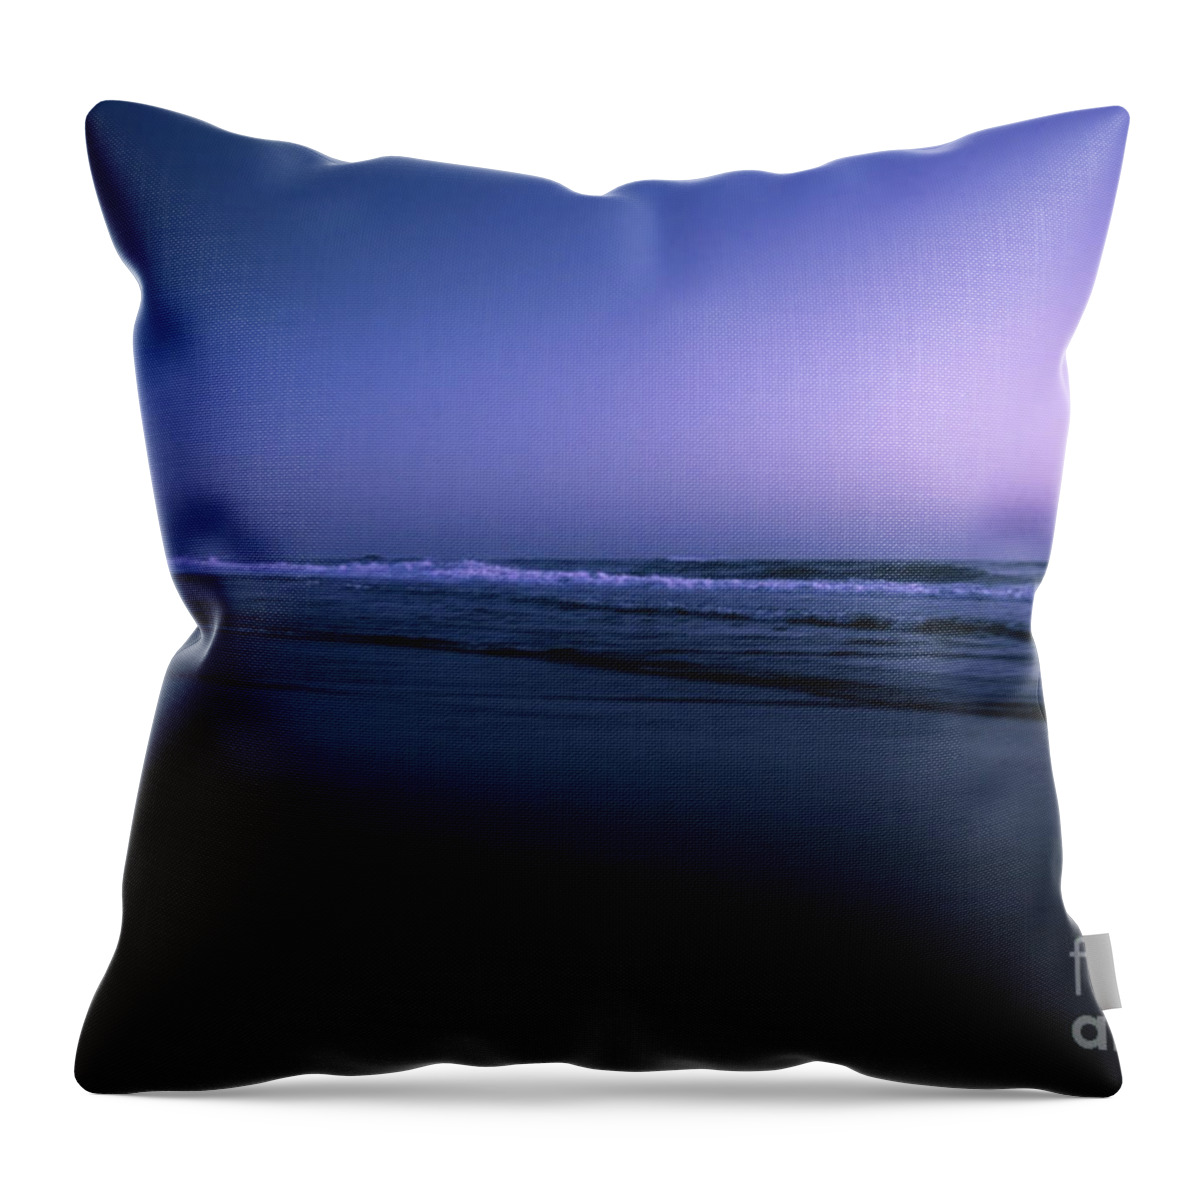 Water Throw Pillow featuring the photograph Night At The Ocean by Hannes Cmarits